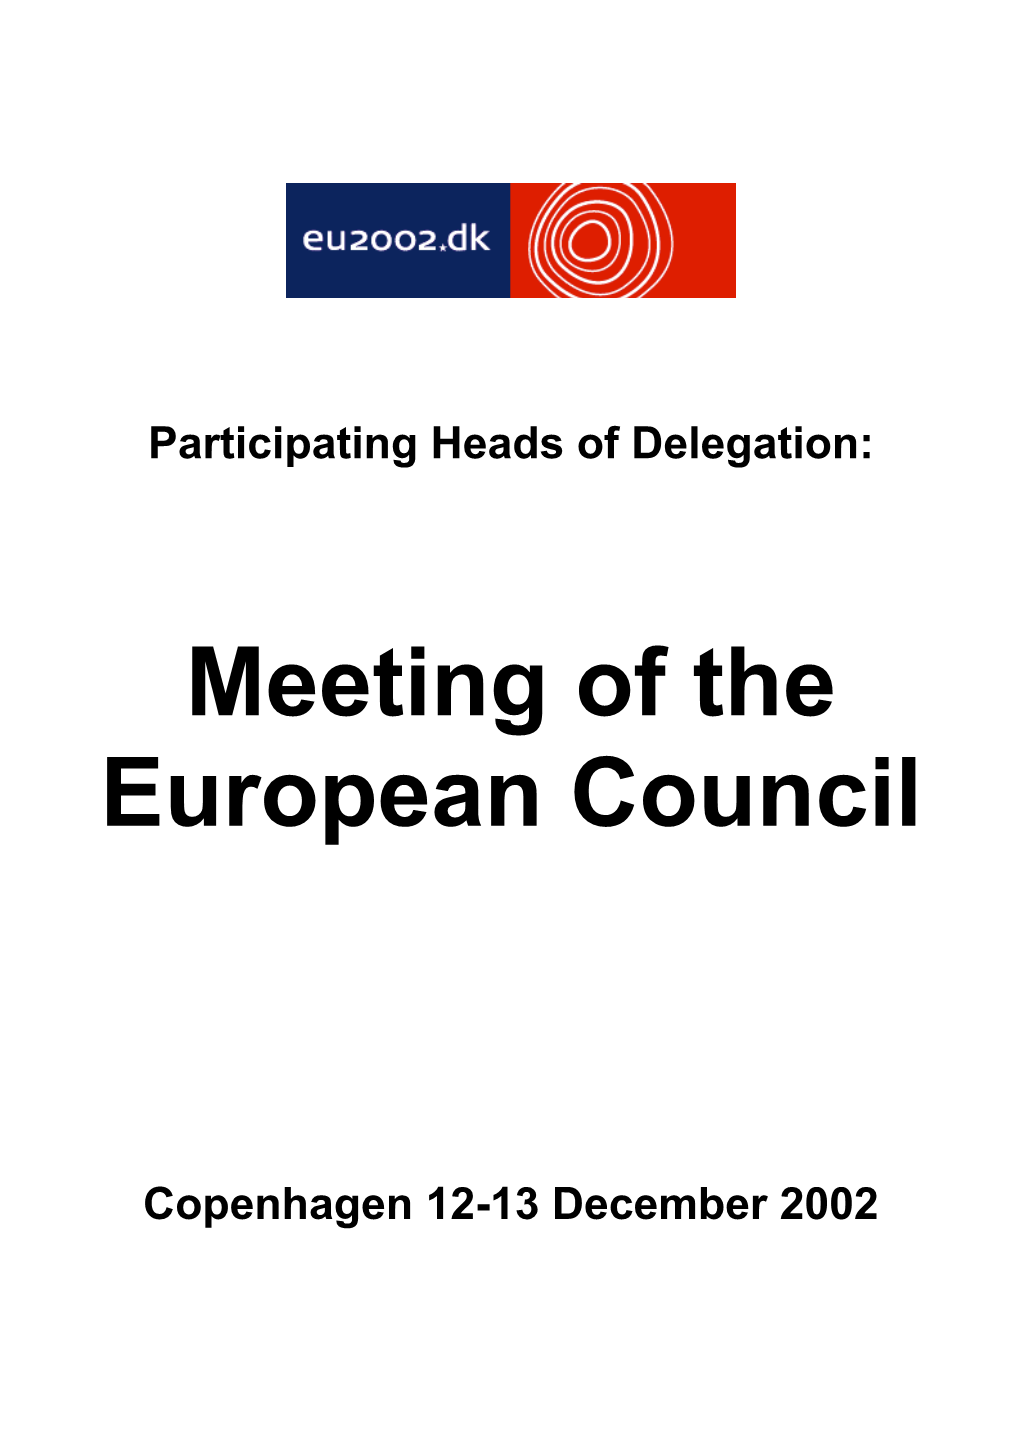 Meeting of the European Council